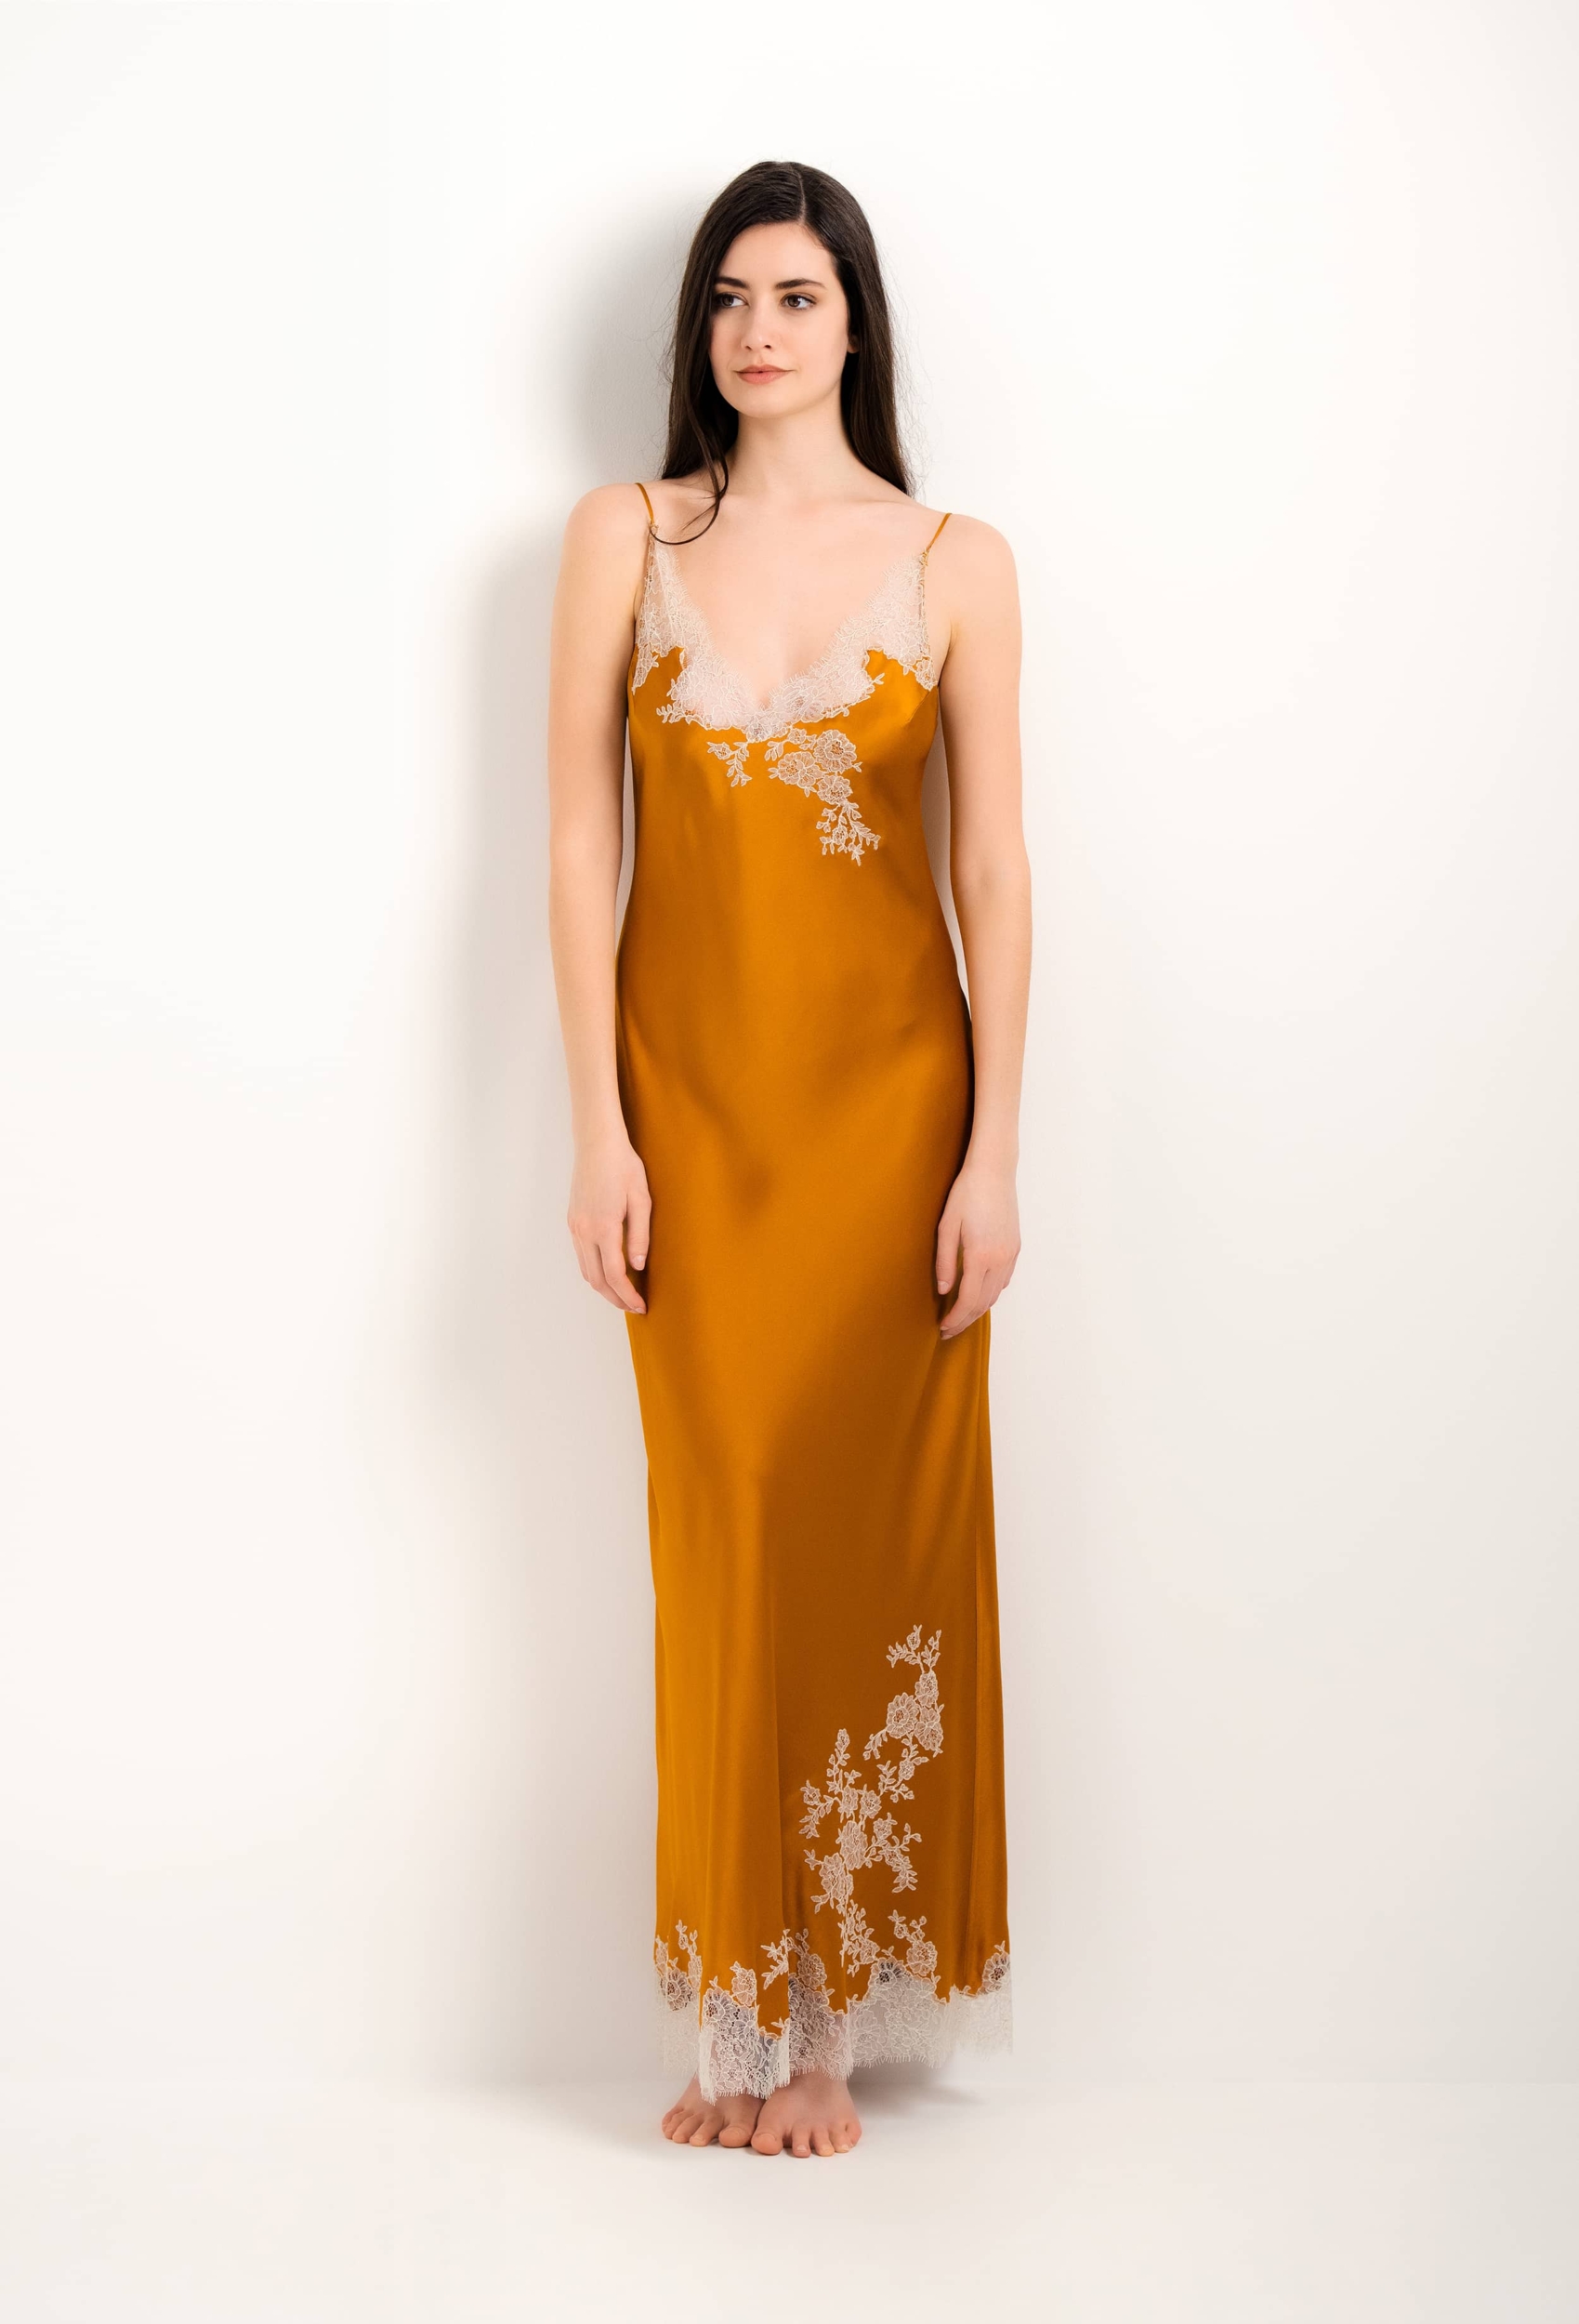 Long silk slip dress - Amber and ivory Caudry lace - Carine Gilson